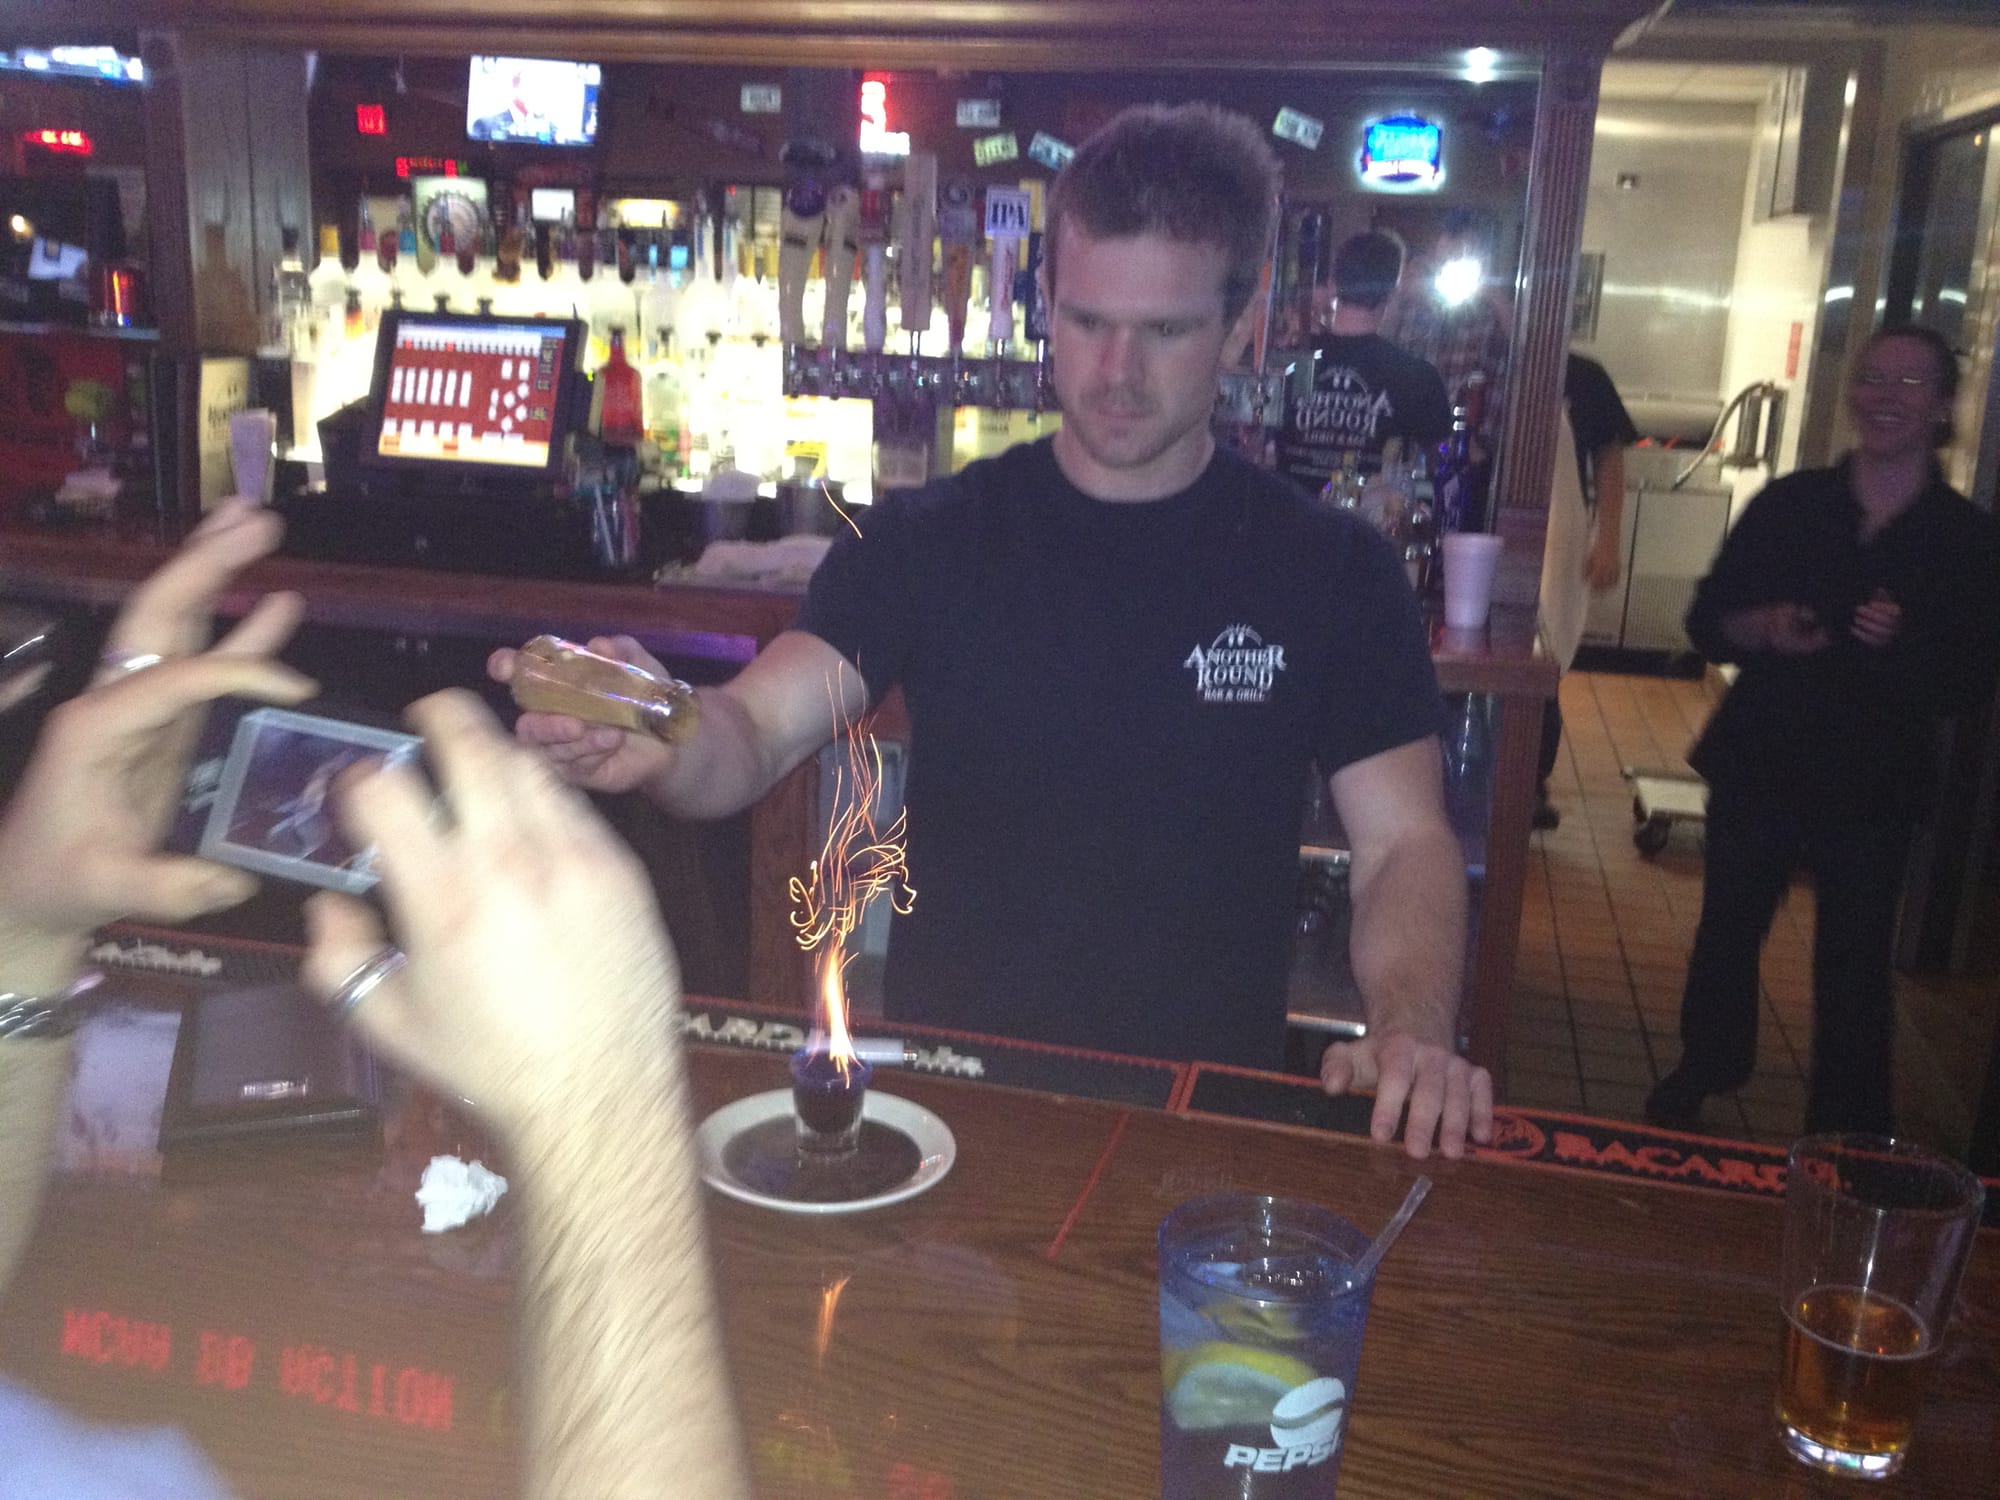 Scott Deady mixing a flaming cocktail when he was a bartender prior to joinging SpotOn